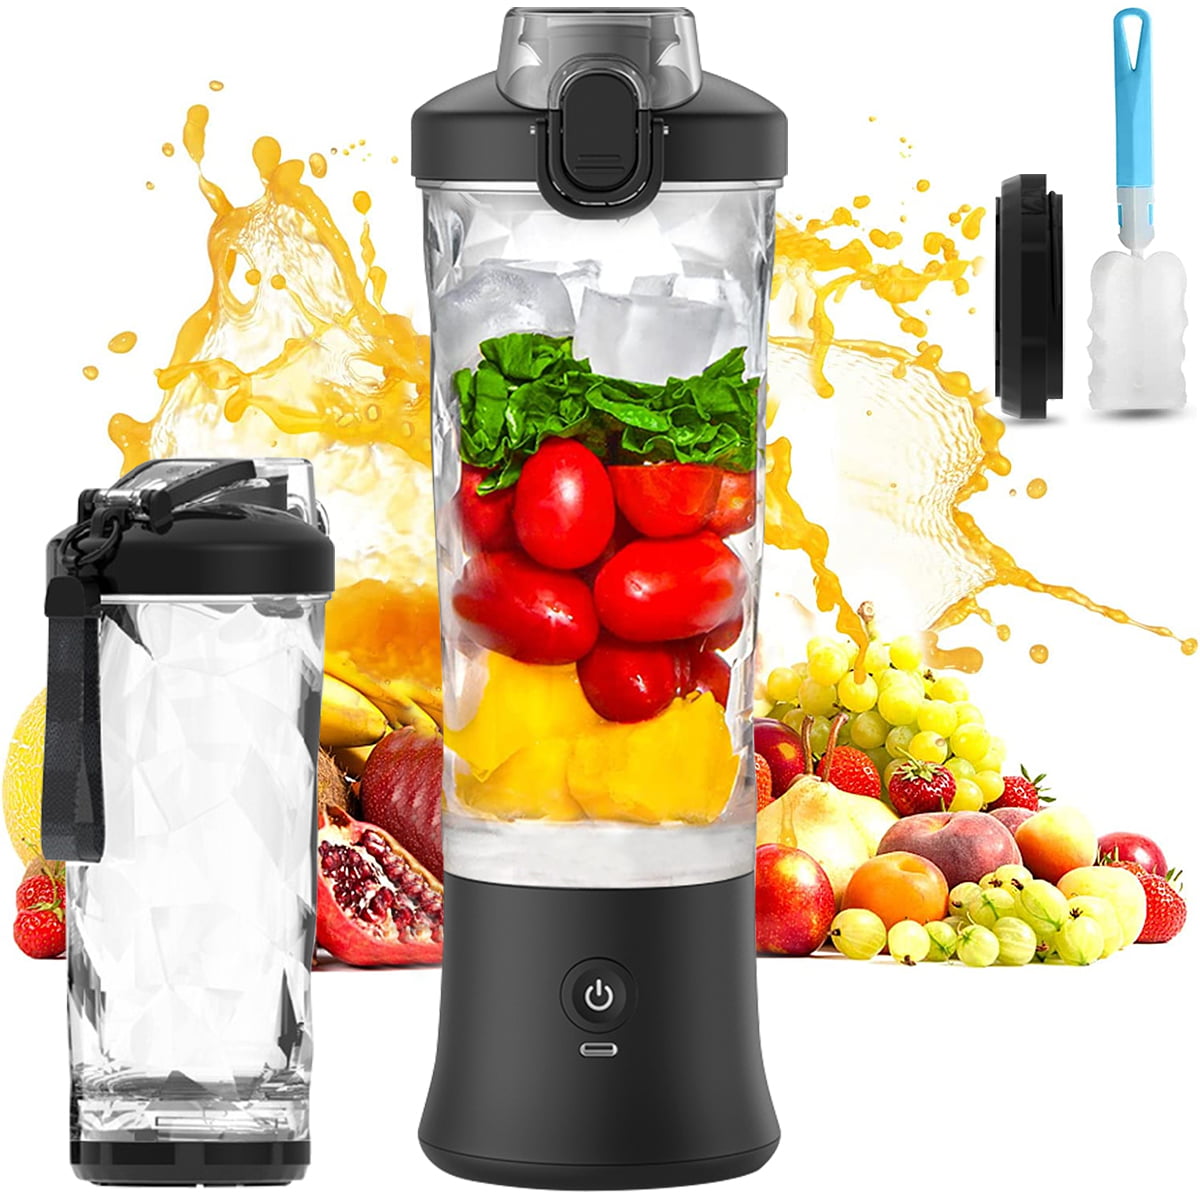 Fimilo 600ml Portable Blenders with 18000 RPM, USB Rechargeable Personal Blender for Shakes and Smoothies with 6 Blades,20 oz Pulse Mini Ice Blender